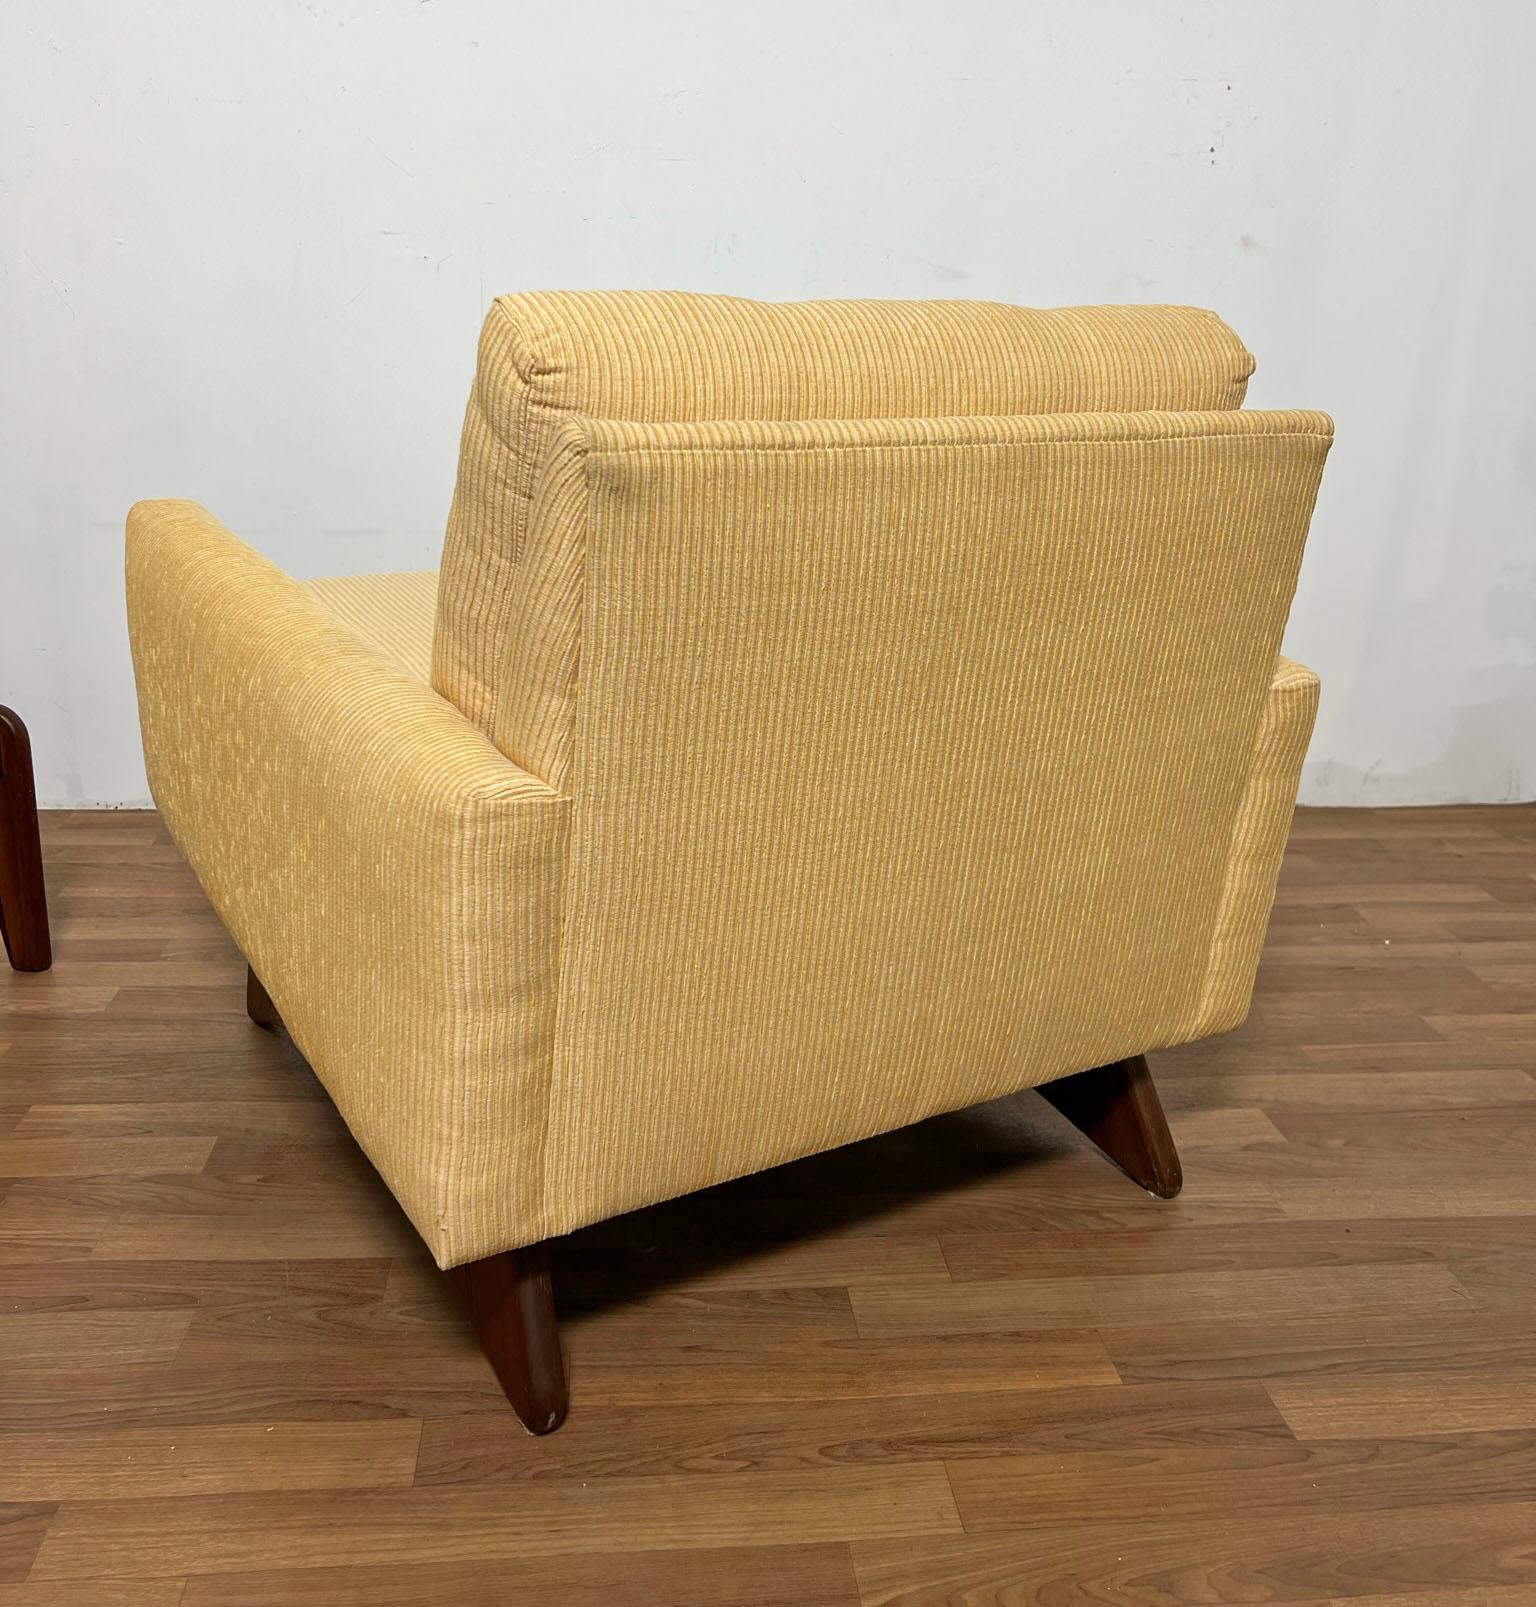 Adrian Pearsall for Craft Associates Lounge Chair and Ottoman, circa 1960s In Good Condition For Sale In Peabody, MA